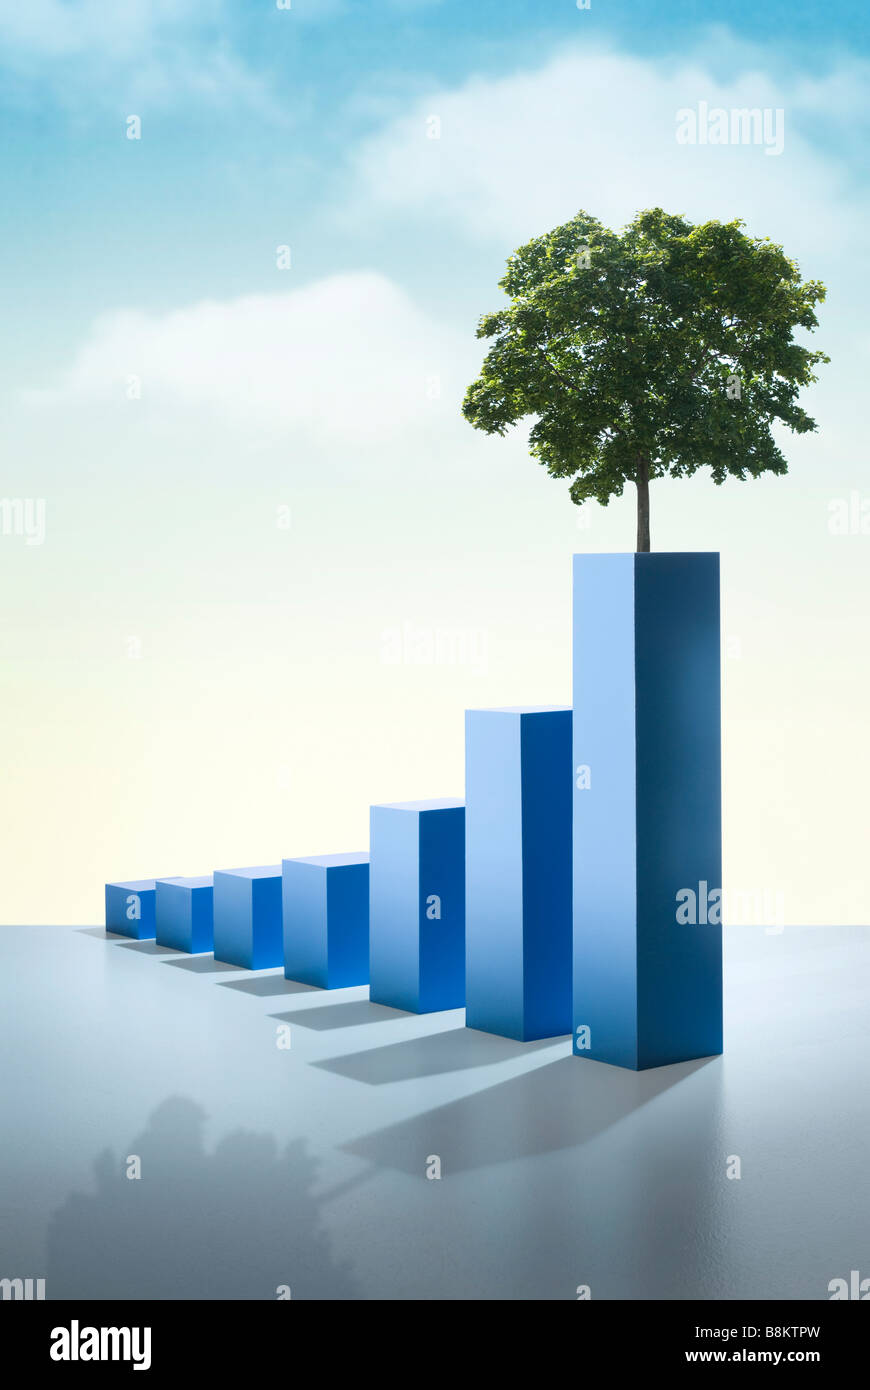 Hand crafted painted wood bar graph with tree image showing an upward trend Stock Photo